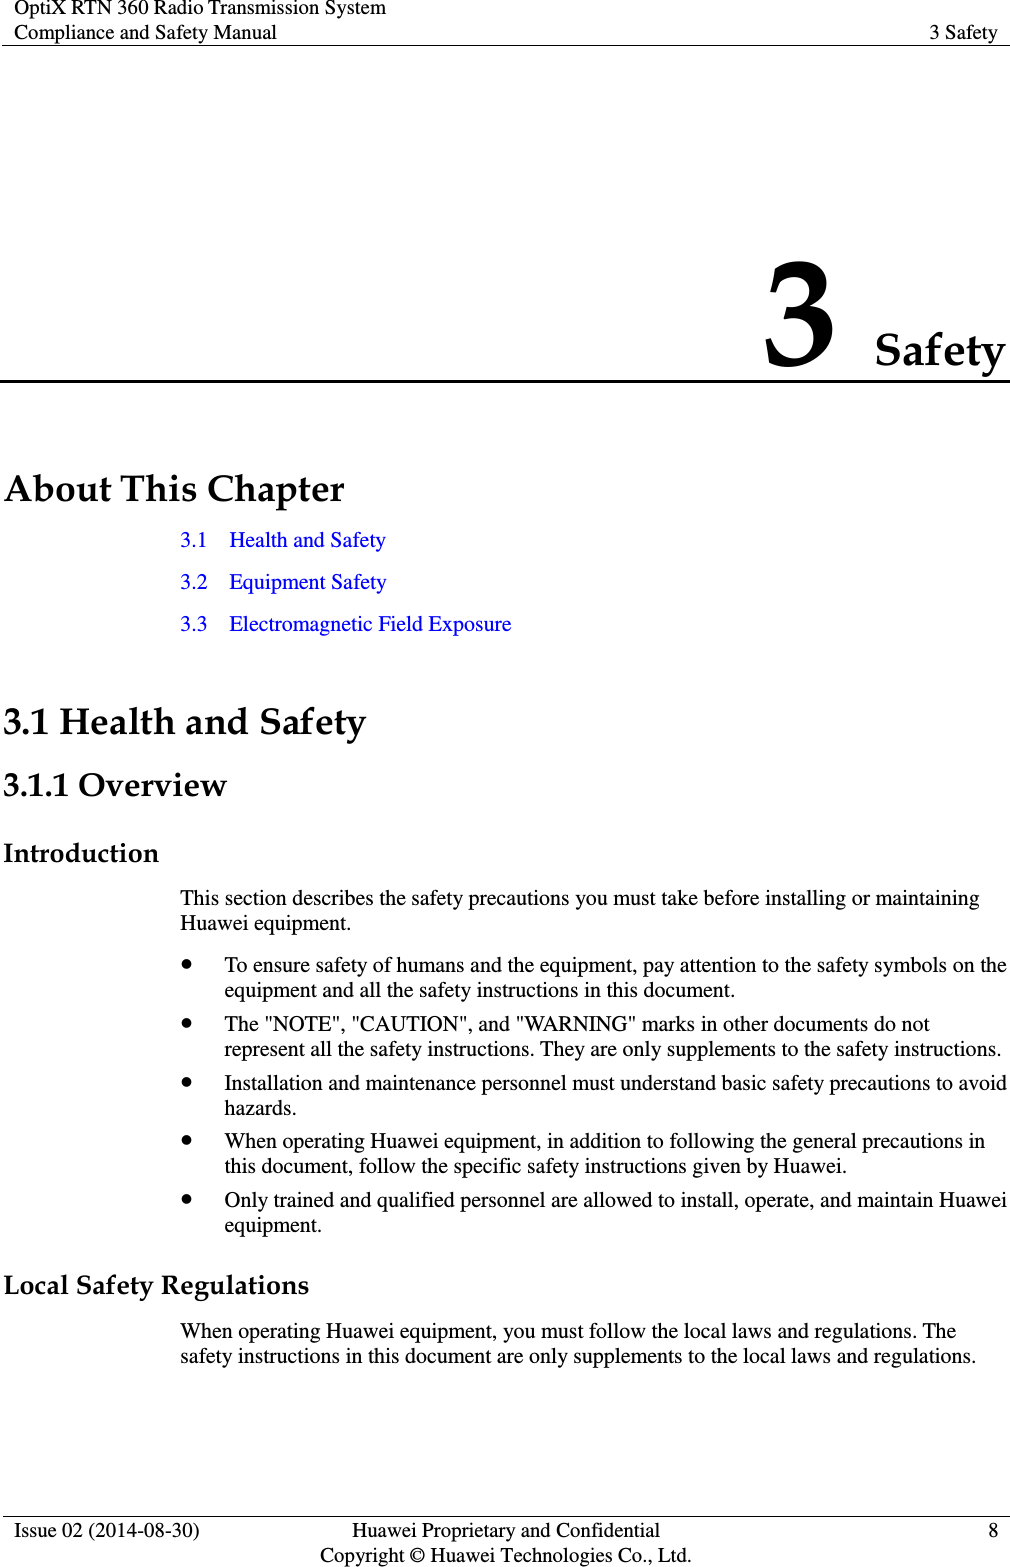 OptiX RTN 360 Radio Transmission System Compliance and Safety Manual 3 Safety  Issue 02 (2014-08-30) Huawei Proprietary and Confidential                                     Copyright © Huawei Technologies Co., Ltd. 8  3 Safety About This Chapter 3.1    Health and Safety 3.2    Equipment Safety 3.3    Electromagnetic Field Exposure 3.1 Health and Safety 3.1.1 Overview Introduction This section describes the safety precautions you must take before installing or maintaining Huawei equipment.  To ensure safety of humans and the equipment, pay attention to the safety symbols on the equipment and all the safety instructions in this document.  The &quot;NOTE&quot;, &quot;CAUTION&quot;, and &quot;WARNING&quot; marks in other documents do not represent all the safety instructions. They are only supplements to the safety instructions.  Installation and maintenance personnel must understand basic safety precautions to avoid hazards.  When operating Huawei equipment, in addition to following the general precautions in this document, follow the specific safety instructions given by Huawei.  Only trained and qualified personnel are allowed to install, operate, and maintain Huawei equipment. Local Safety Regulations When operating Huawei equipment, you must follow the local laws and regulations. The safety instructions in this document are only supplements to the local laws and regulations. 